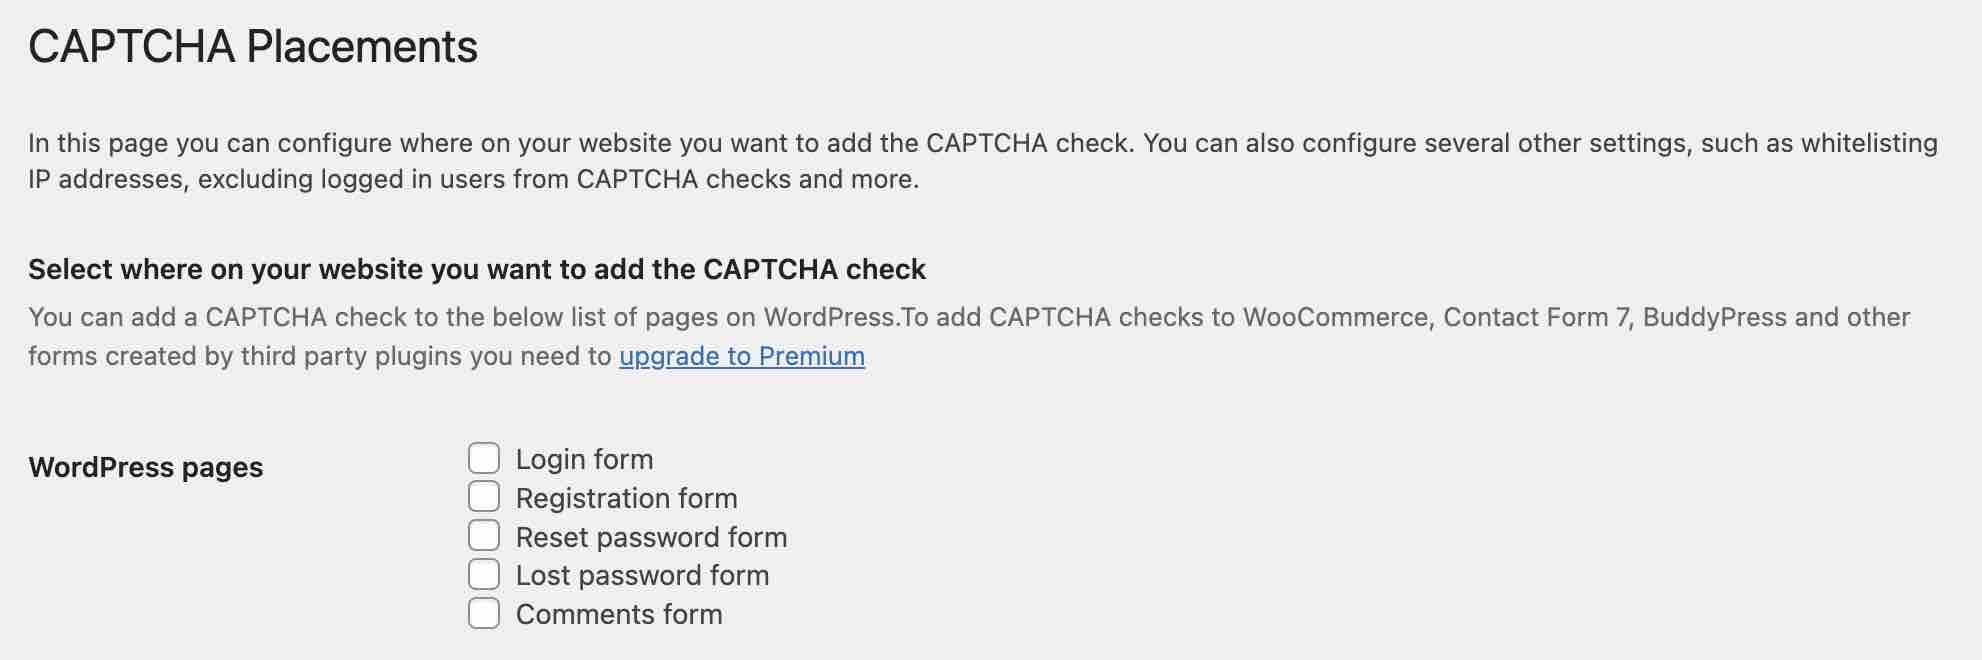 CAPTCHA 4WP can be activated on different forms.